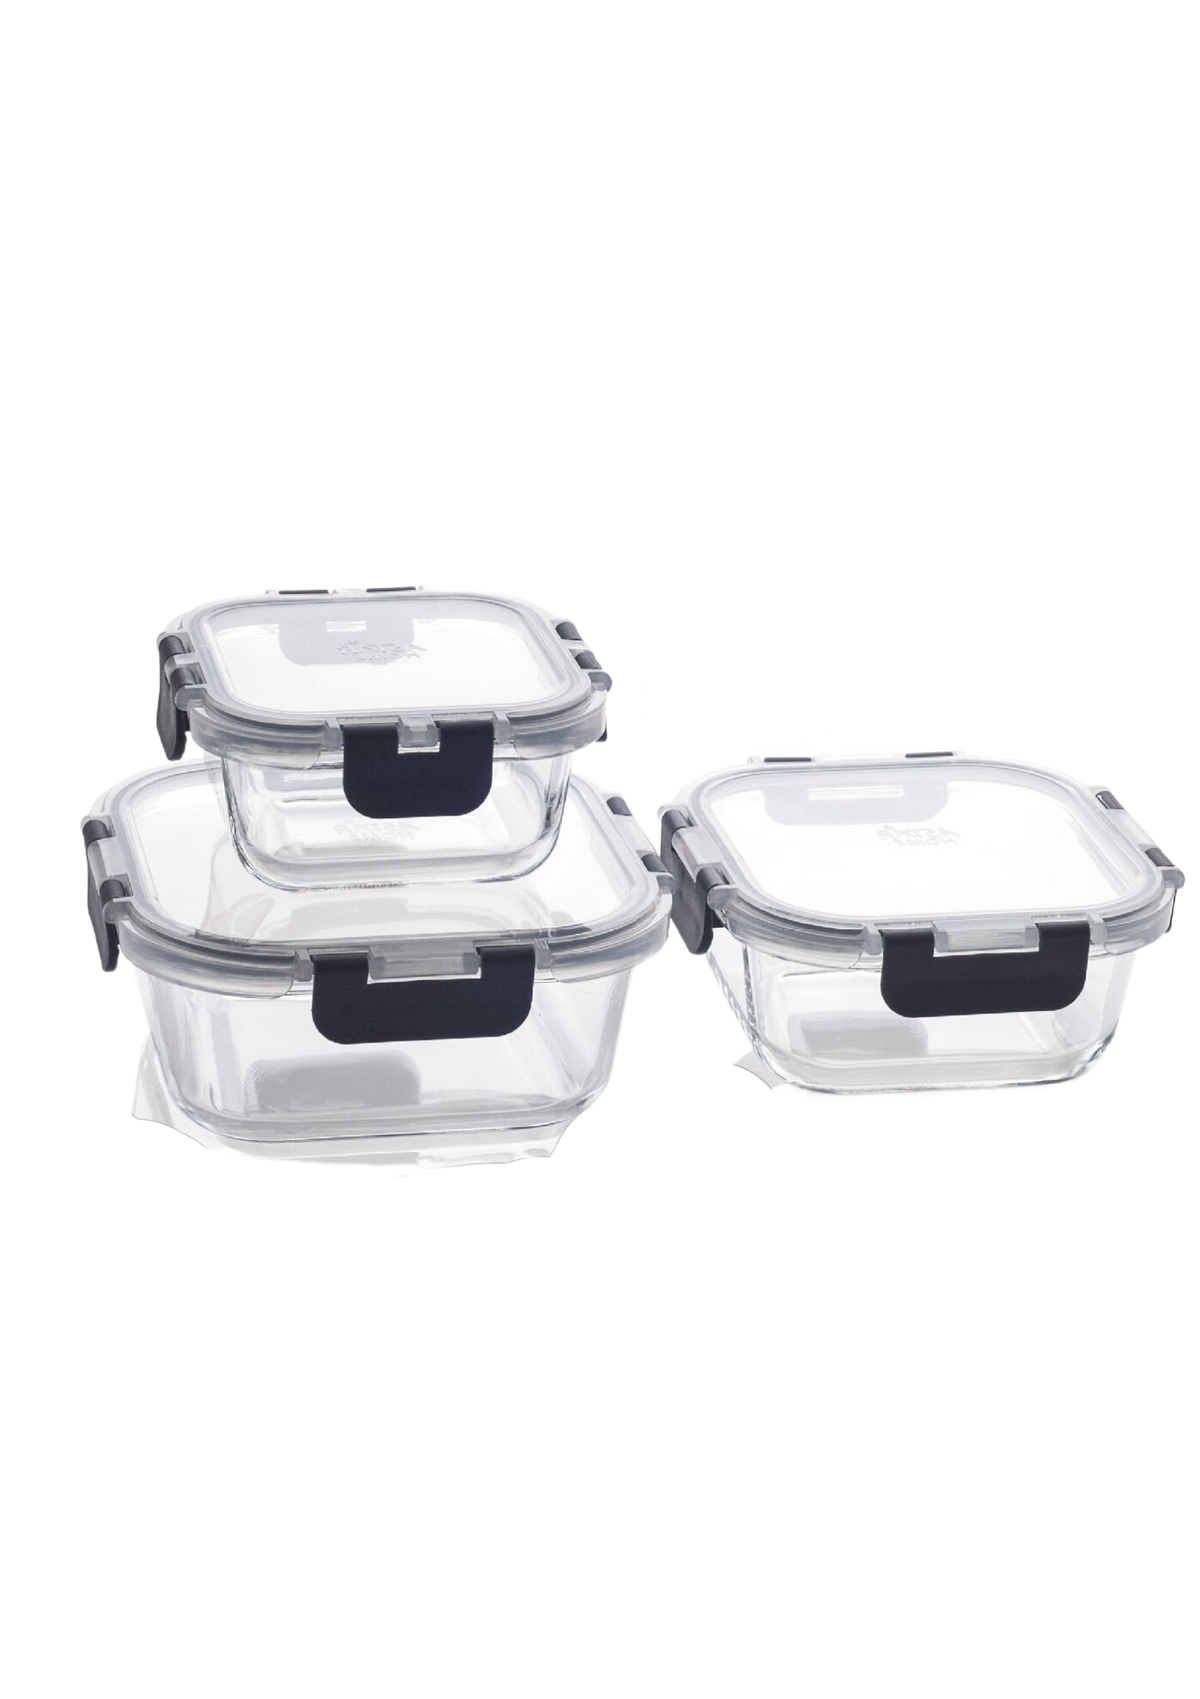 Astar - Glass Food Containers Square